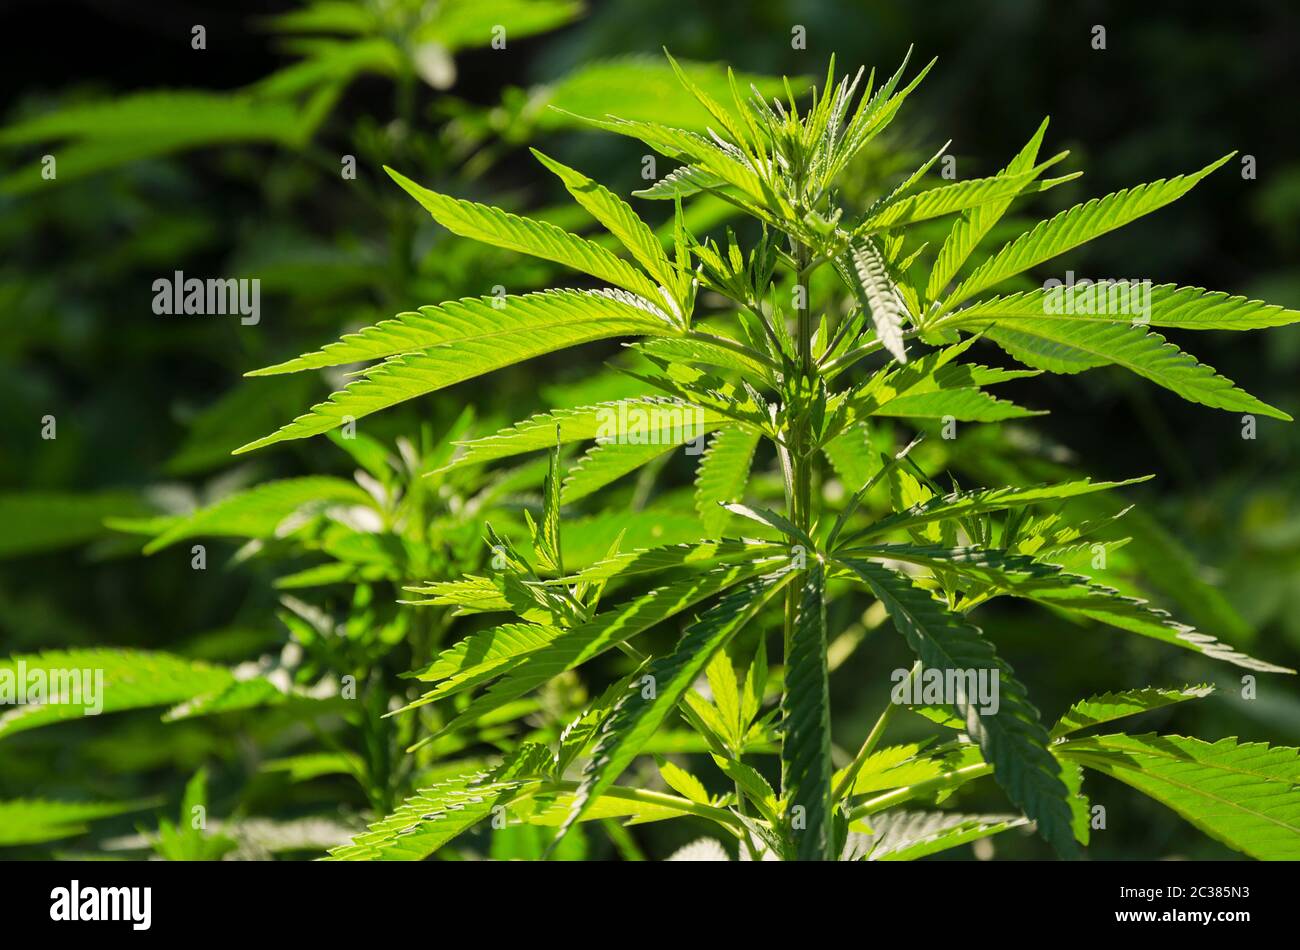 Green background of leaves. Young cannabis plant 3 Stock Photo